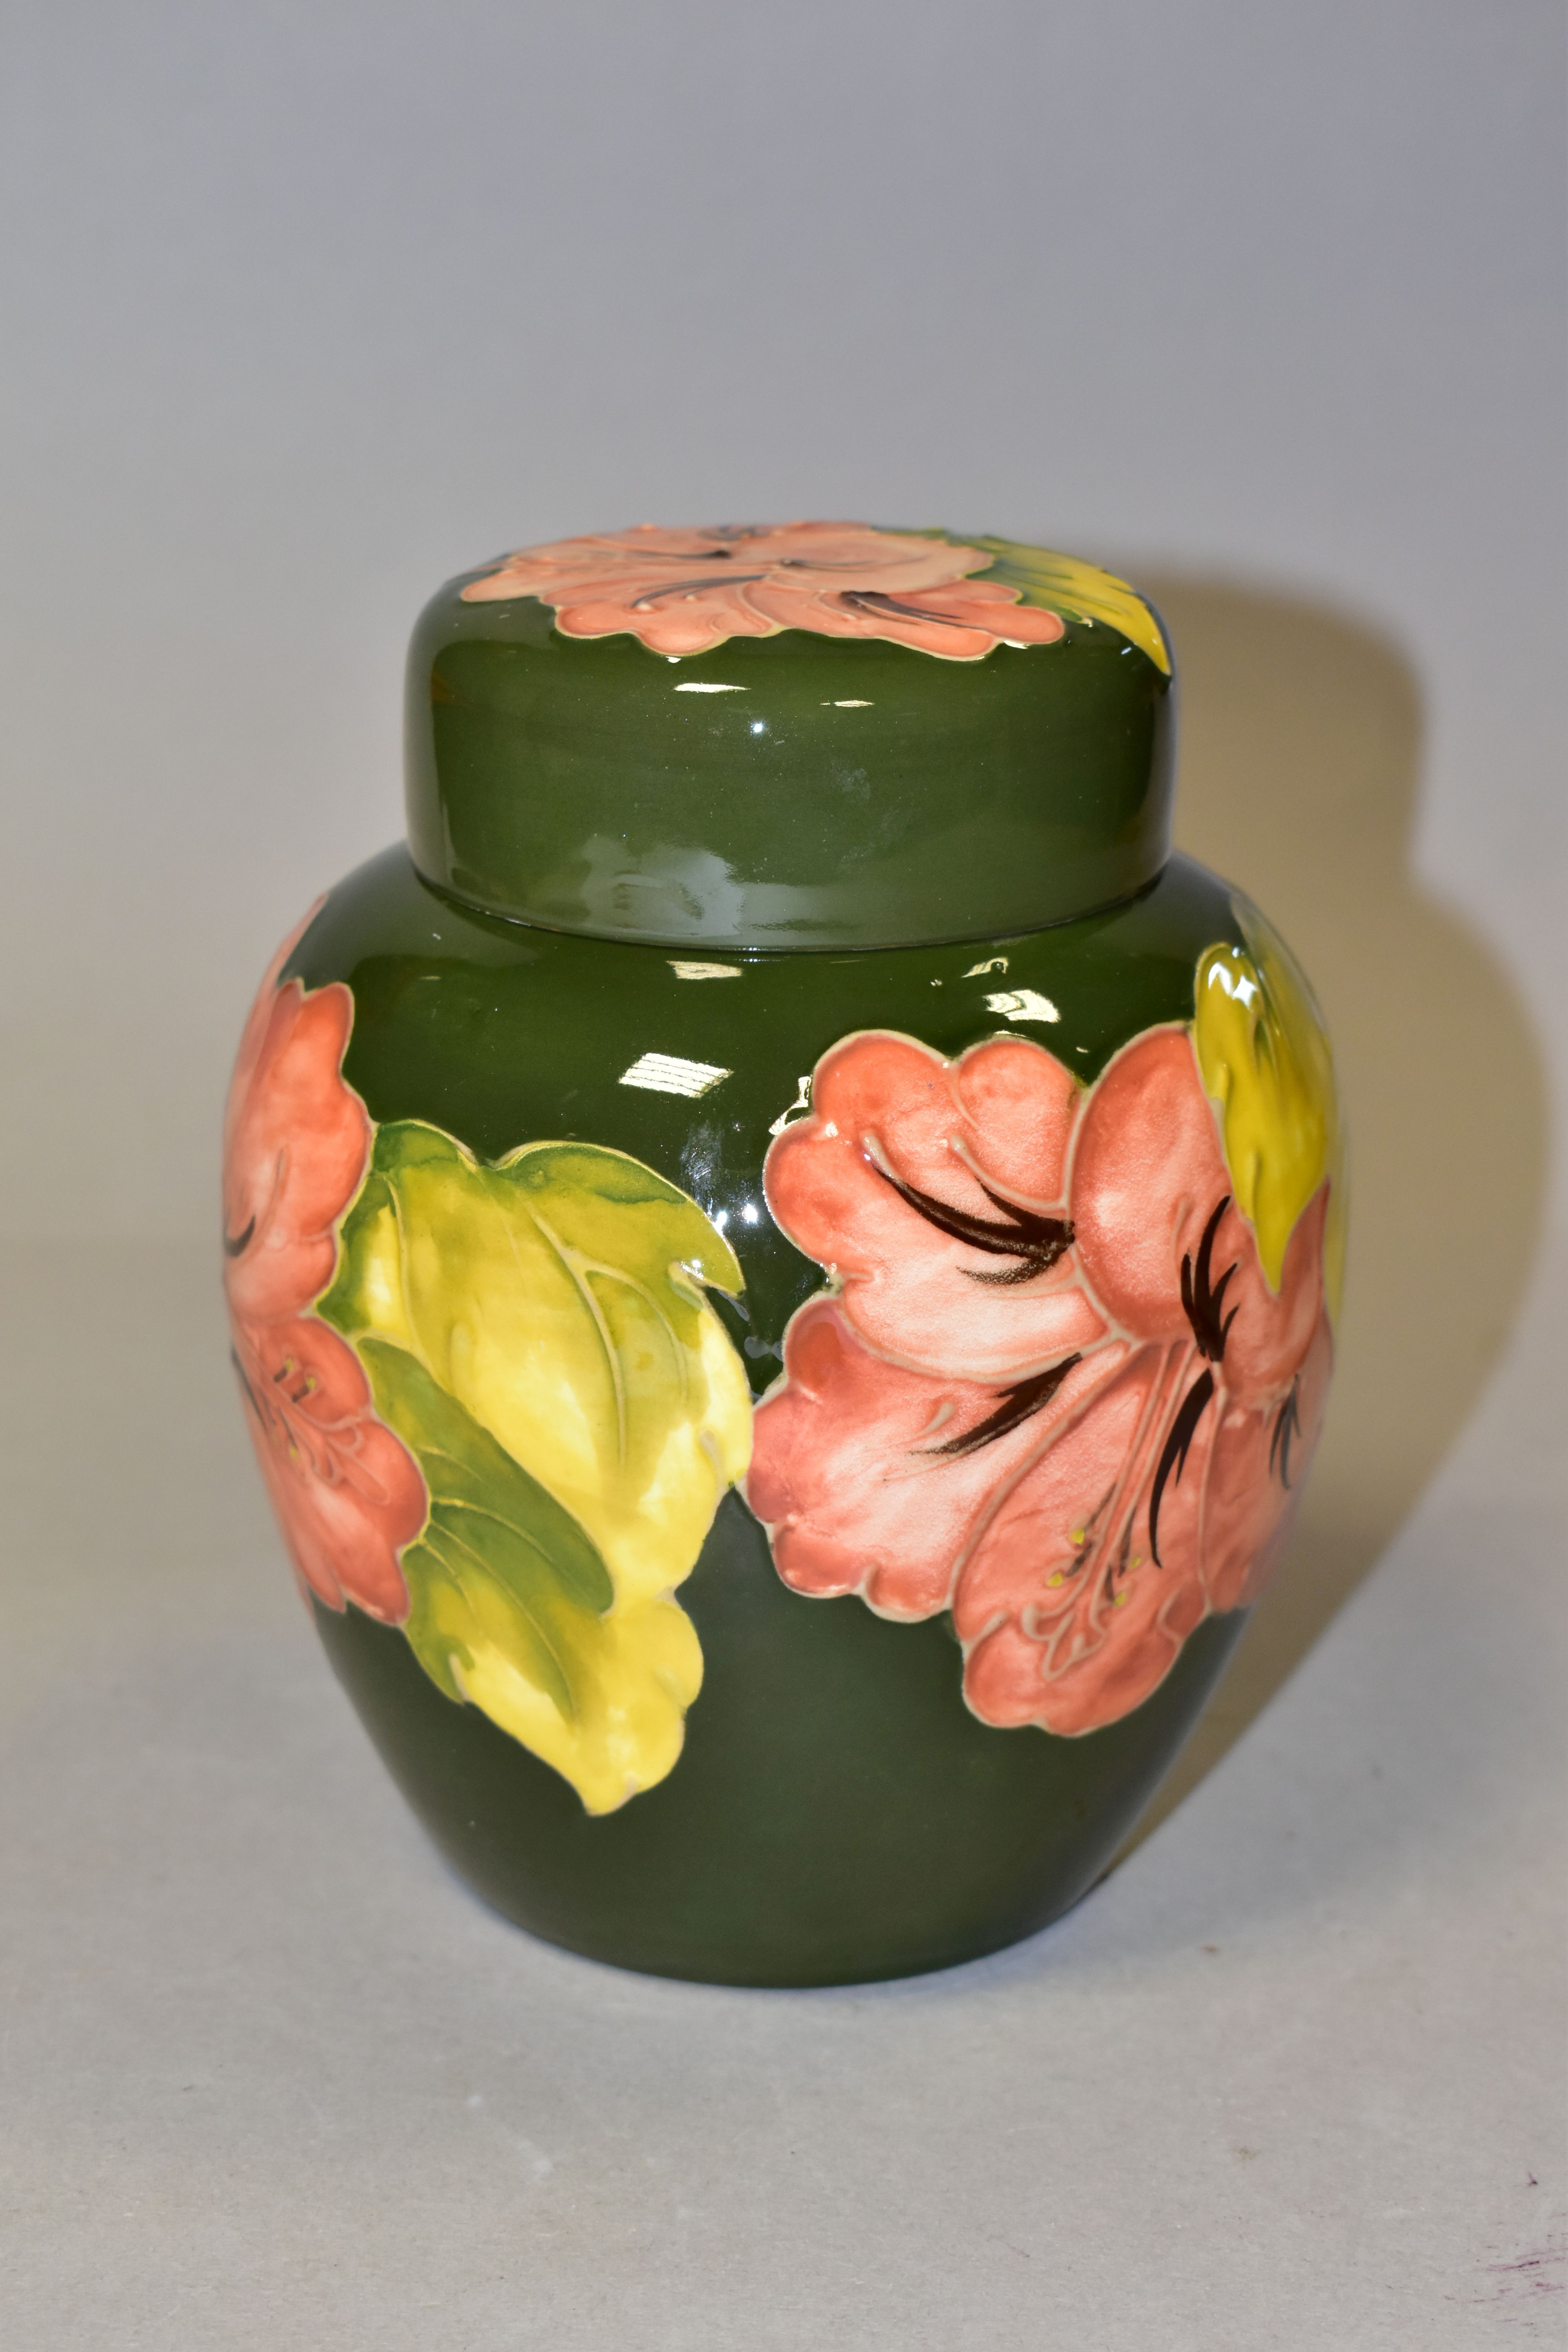 A MOORCROFT POTTERY GINGER JAR AND COVER, in the Coral Hibiscus pattern on a green ground, bears